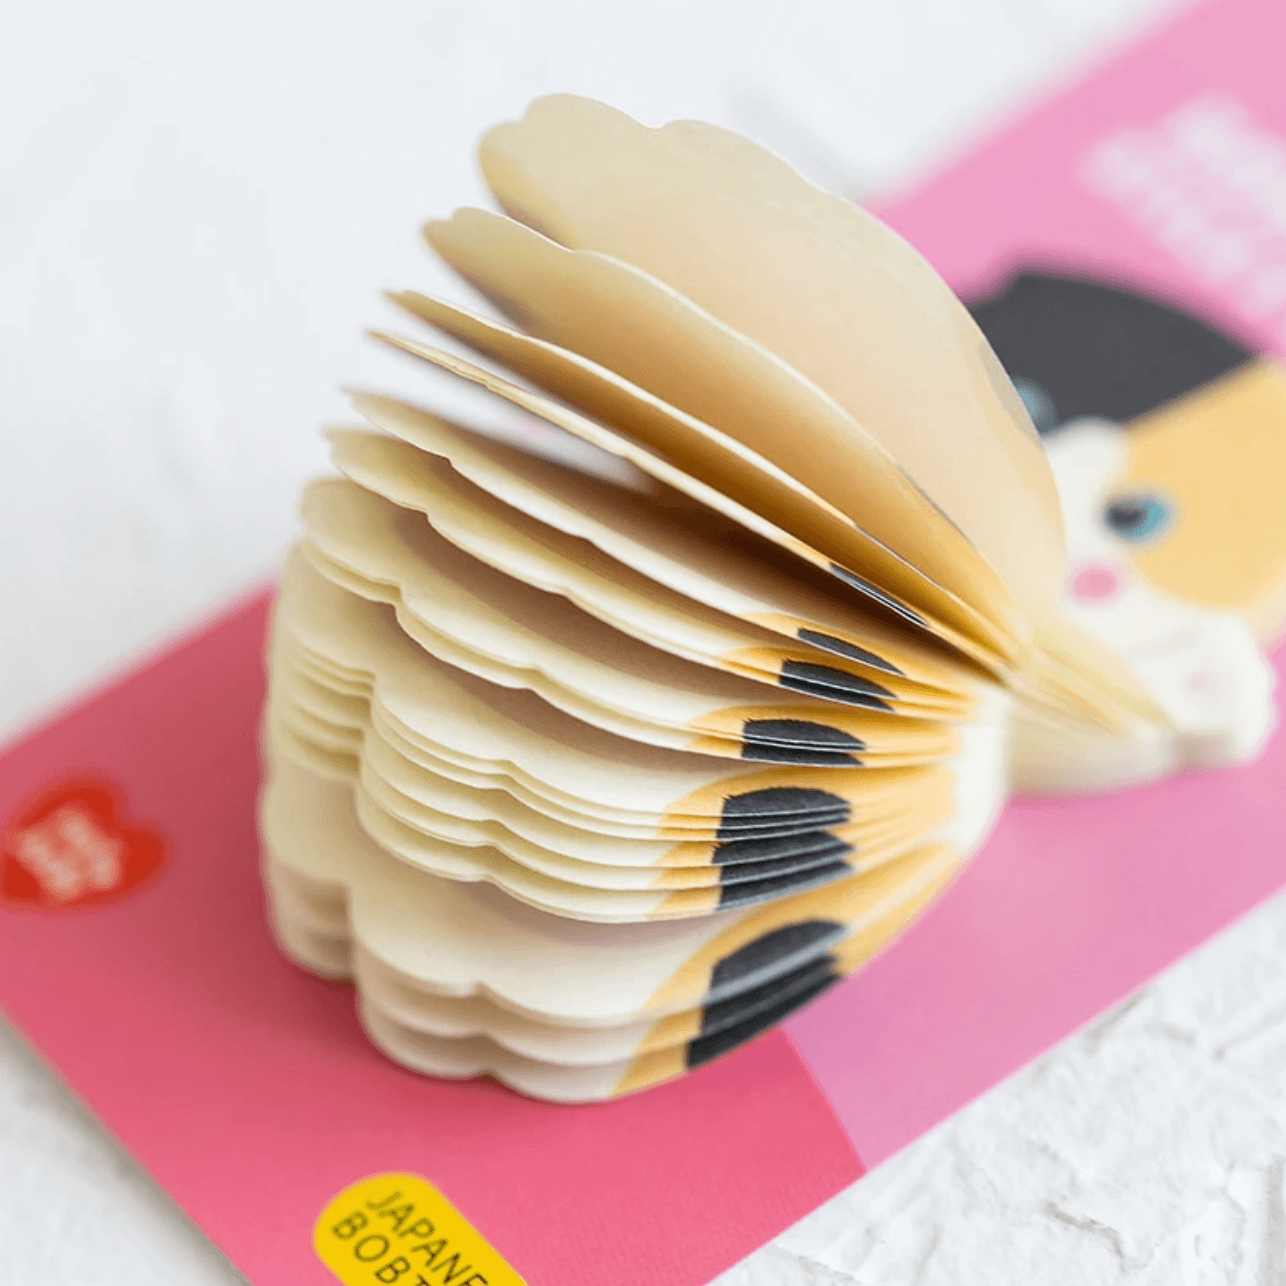 https://cdn.shopify.com/s/files/1/0618/9383/6986/products/hoho-cat-cute-animal-lovers-sticky-notes-memo-pads-4-design-set-4-cats-514219_1600x.png?v=1664244125